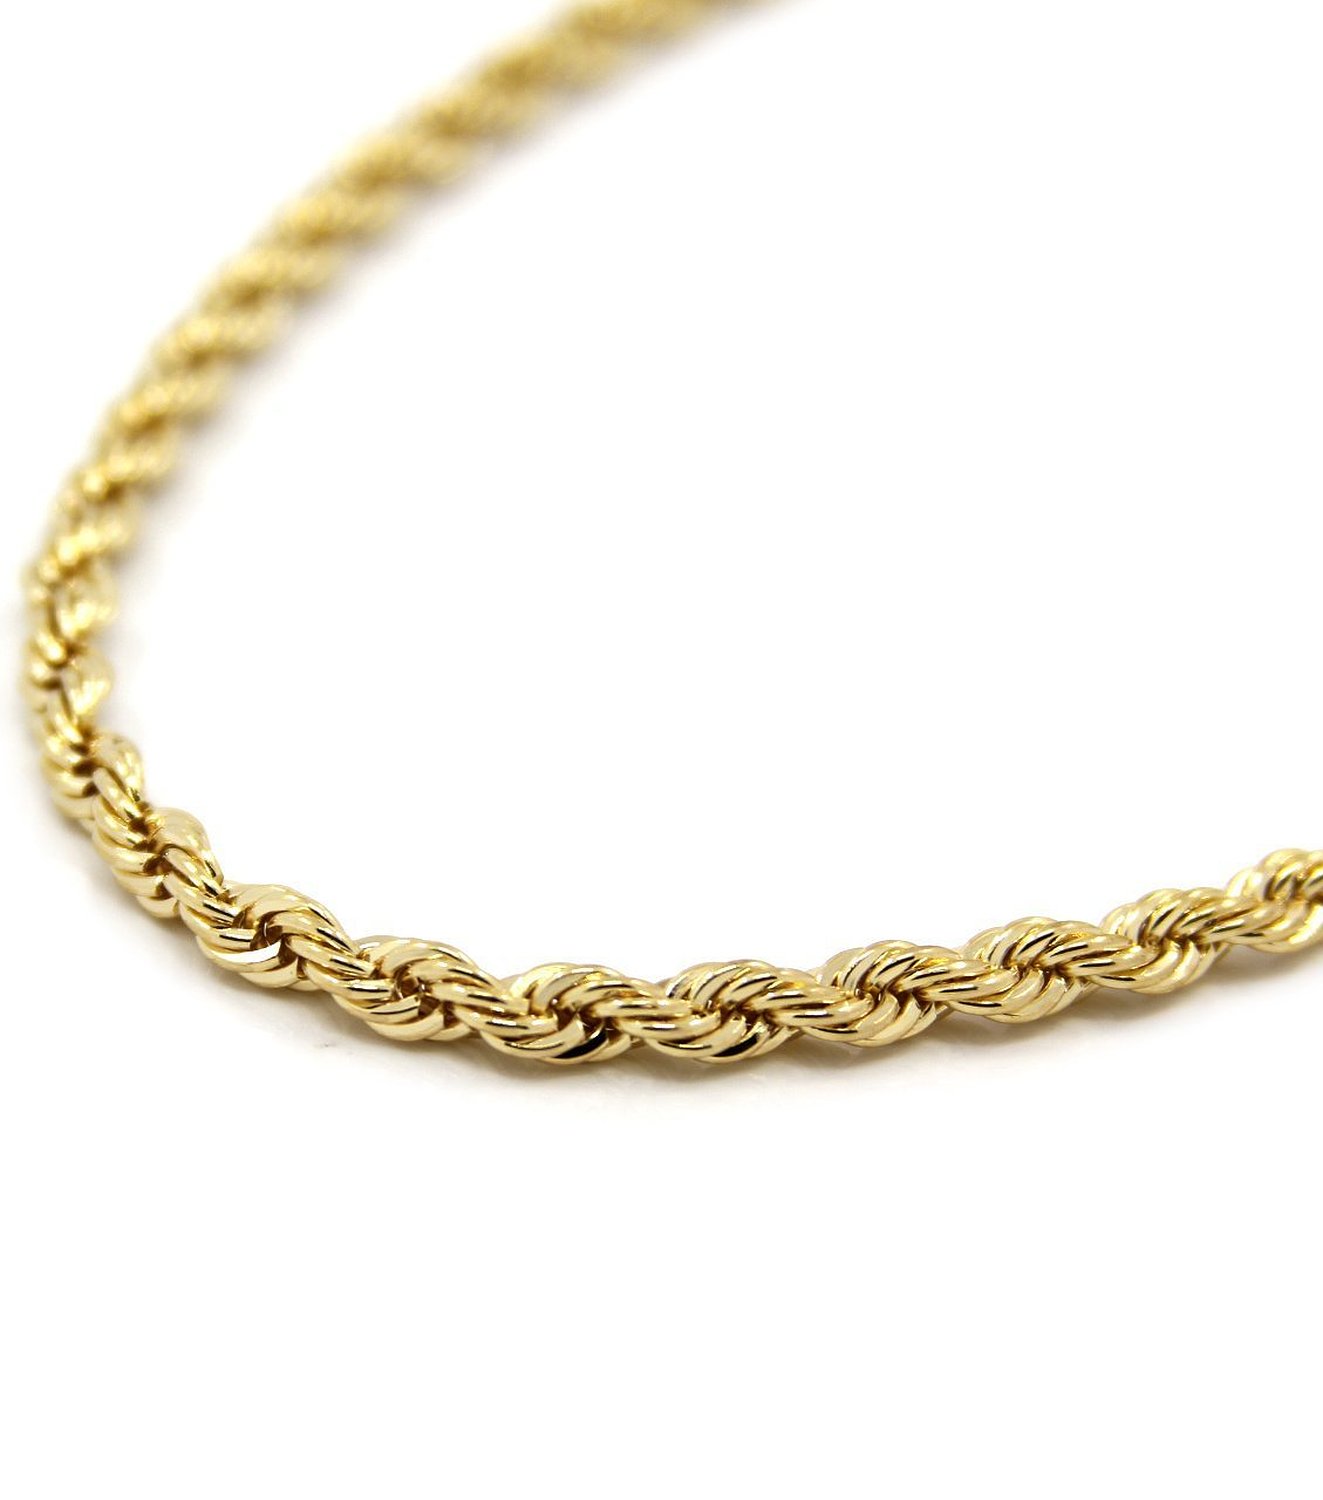 Mens 14K Yellow Gold Filled 5mm Rope Chain Necklace